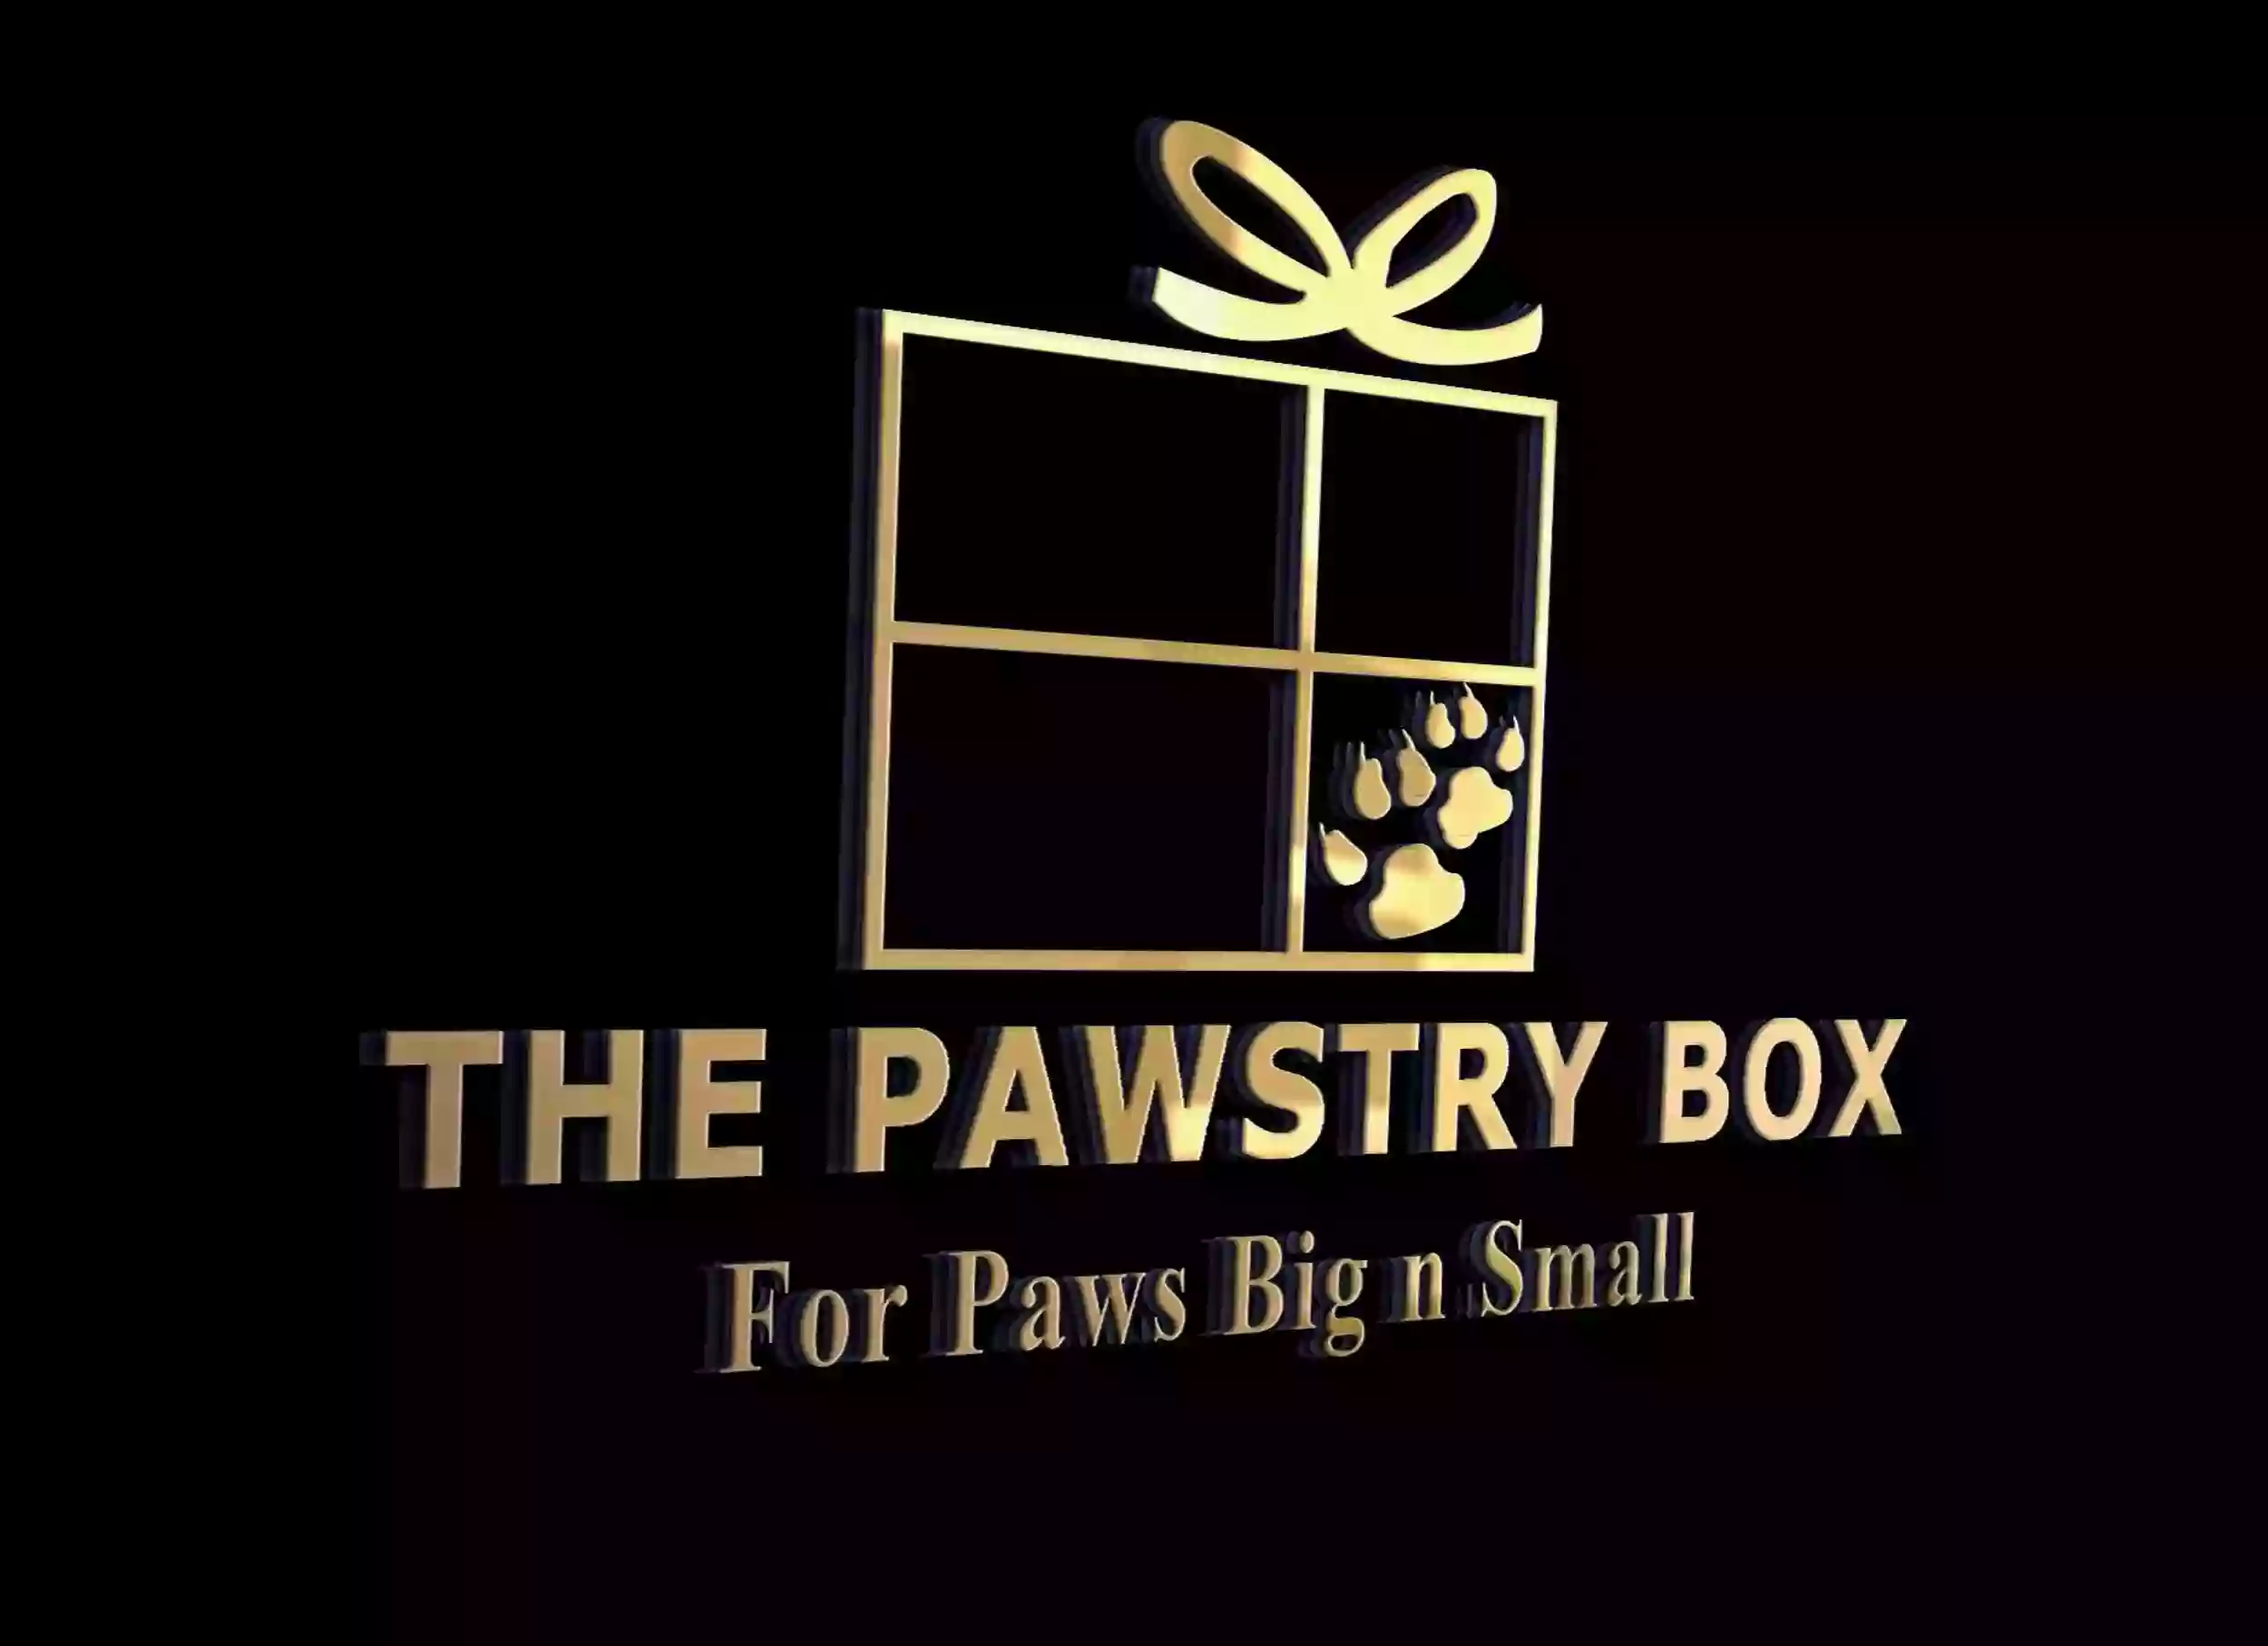 The Pawstry Box